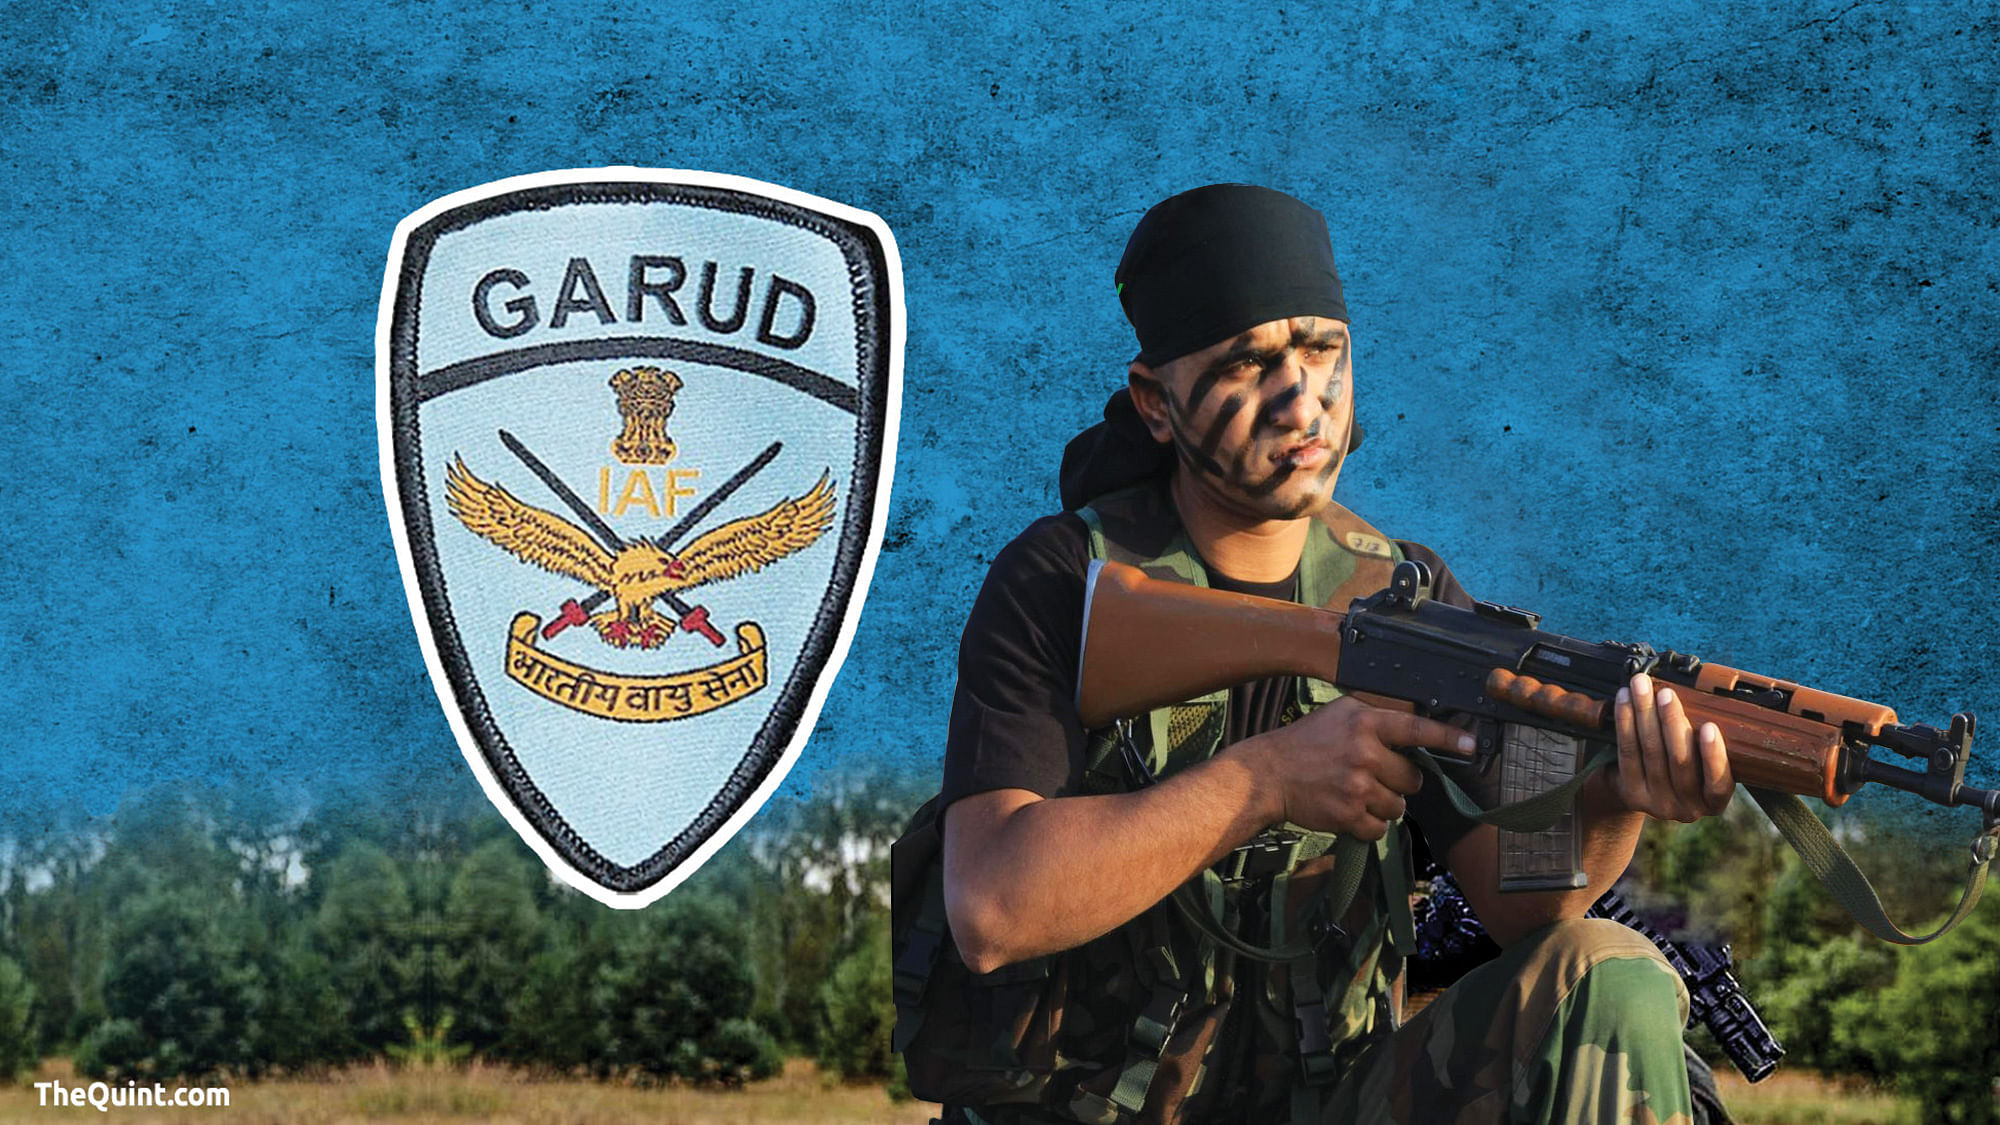 Rise in casualties among the Garud Commando Force raises questions on combat training of IAF’s special force.